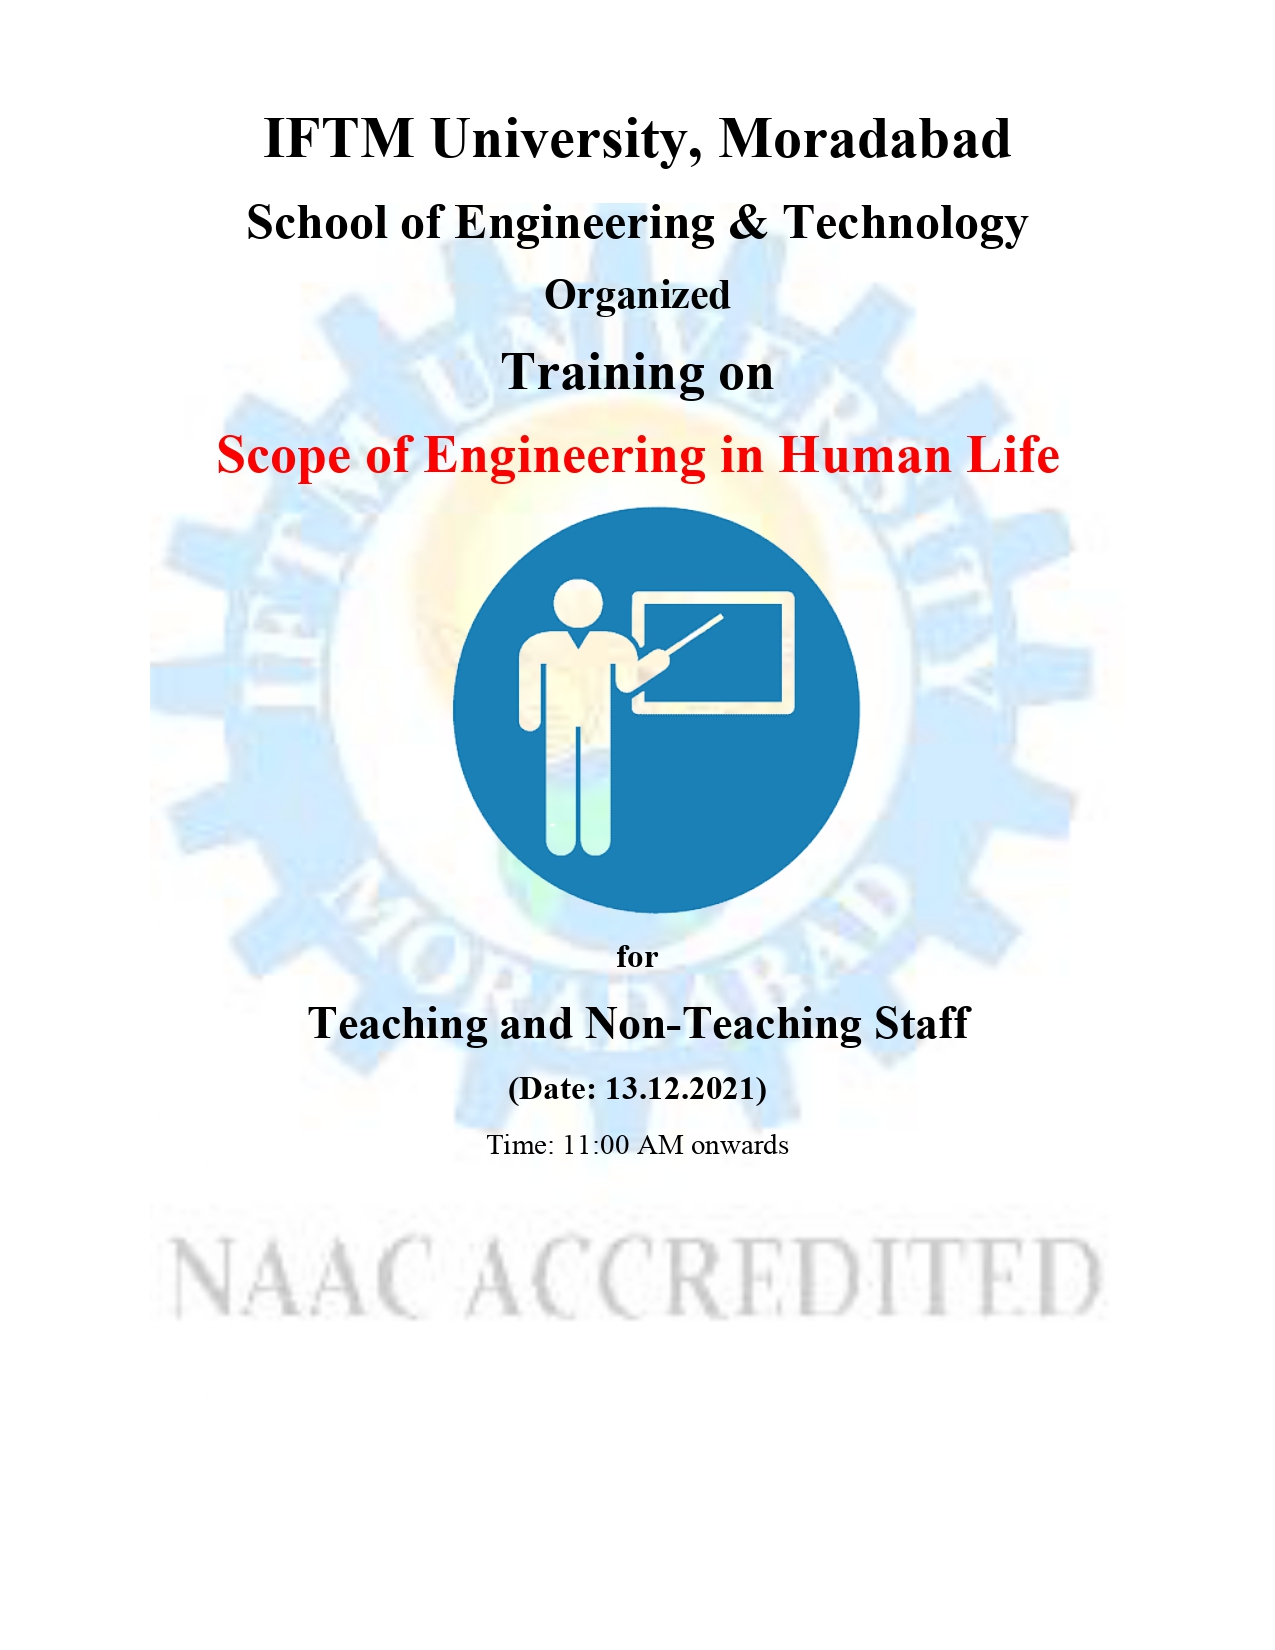 Training on Scope of Engineering in Human Life